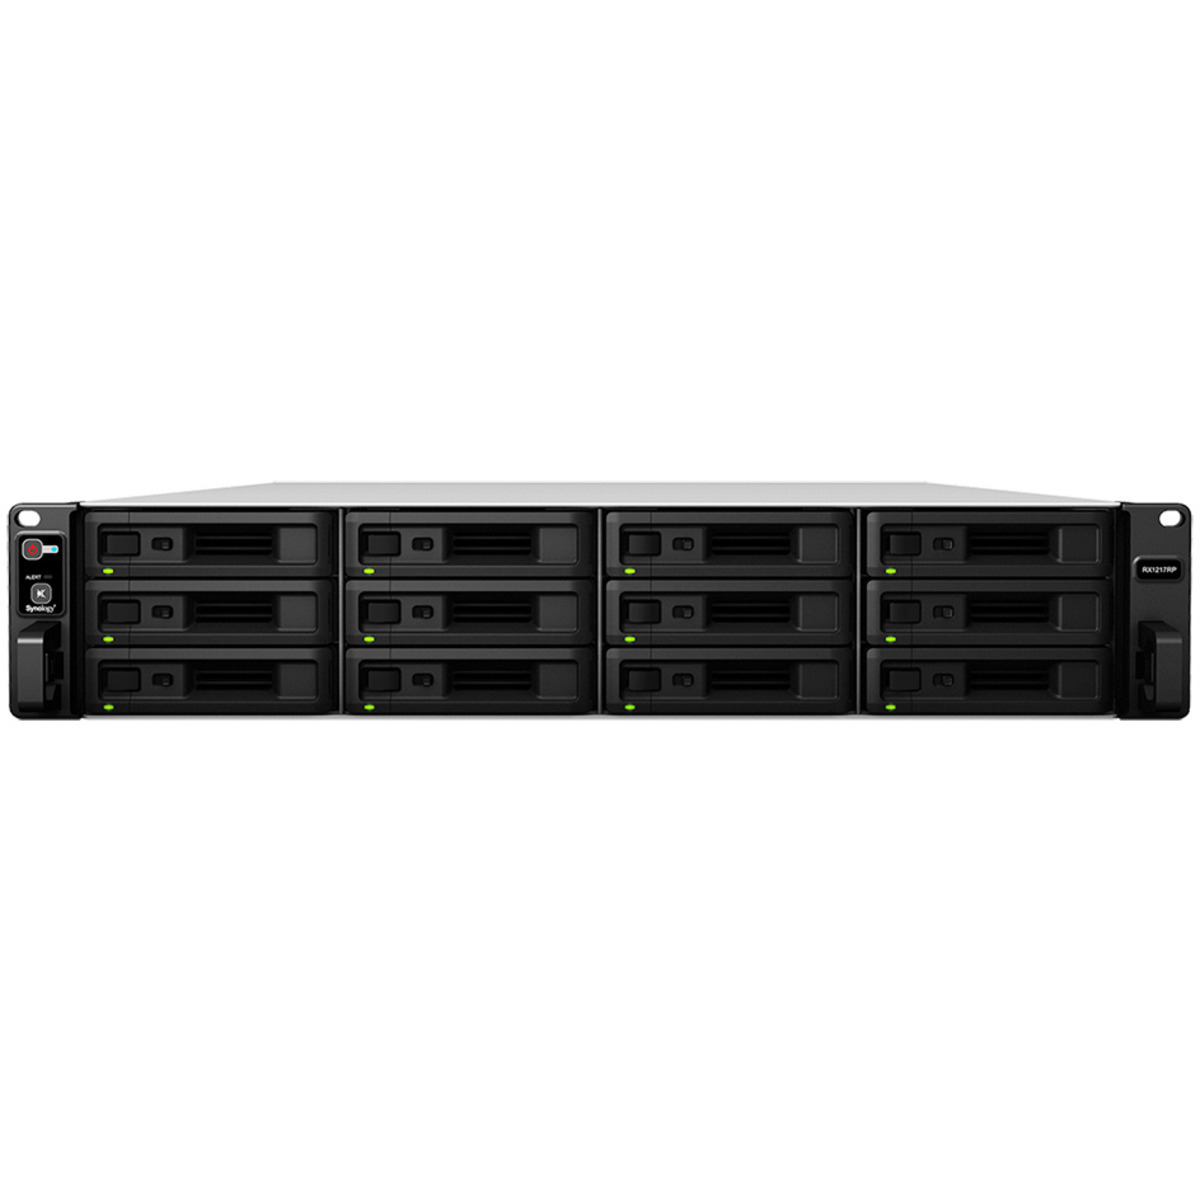 buy $3561 Synology RX1217RP 12tb RackMount Expansion Enclosure 12x1000gb Samsung 870 QVO MZ-77Q1T0 2.5 SATA 6Gb/s SSD CONSUMER Class Drives Installed - Burn-In Tested - nas headquarters buy network attached storage server device das new raid-5 free shipping usa RX1217RP